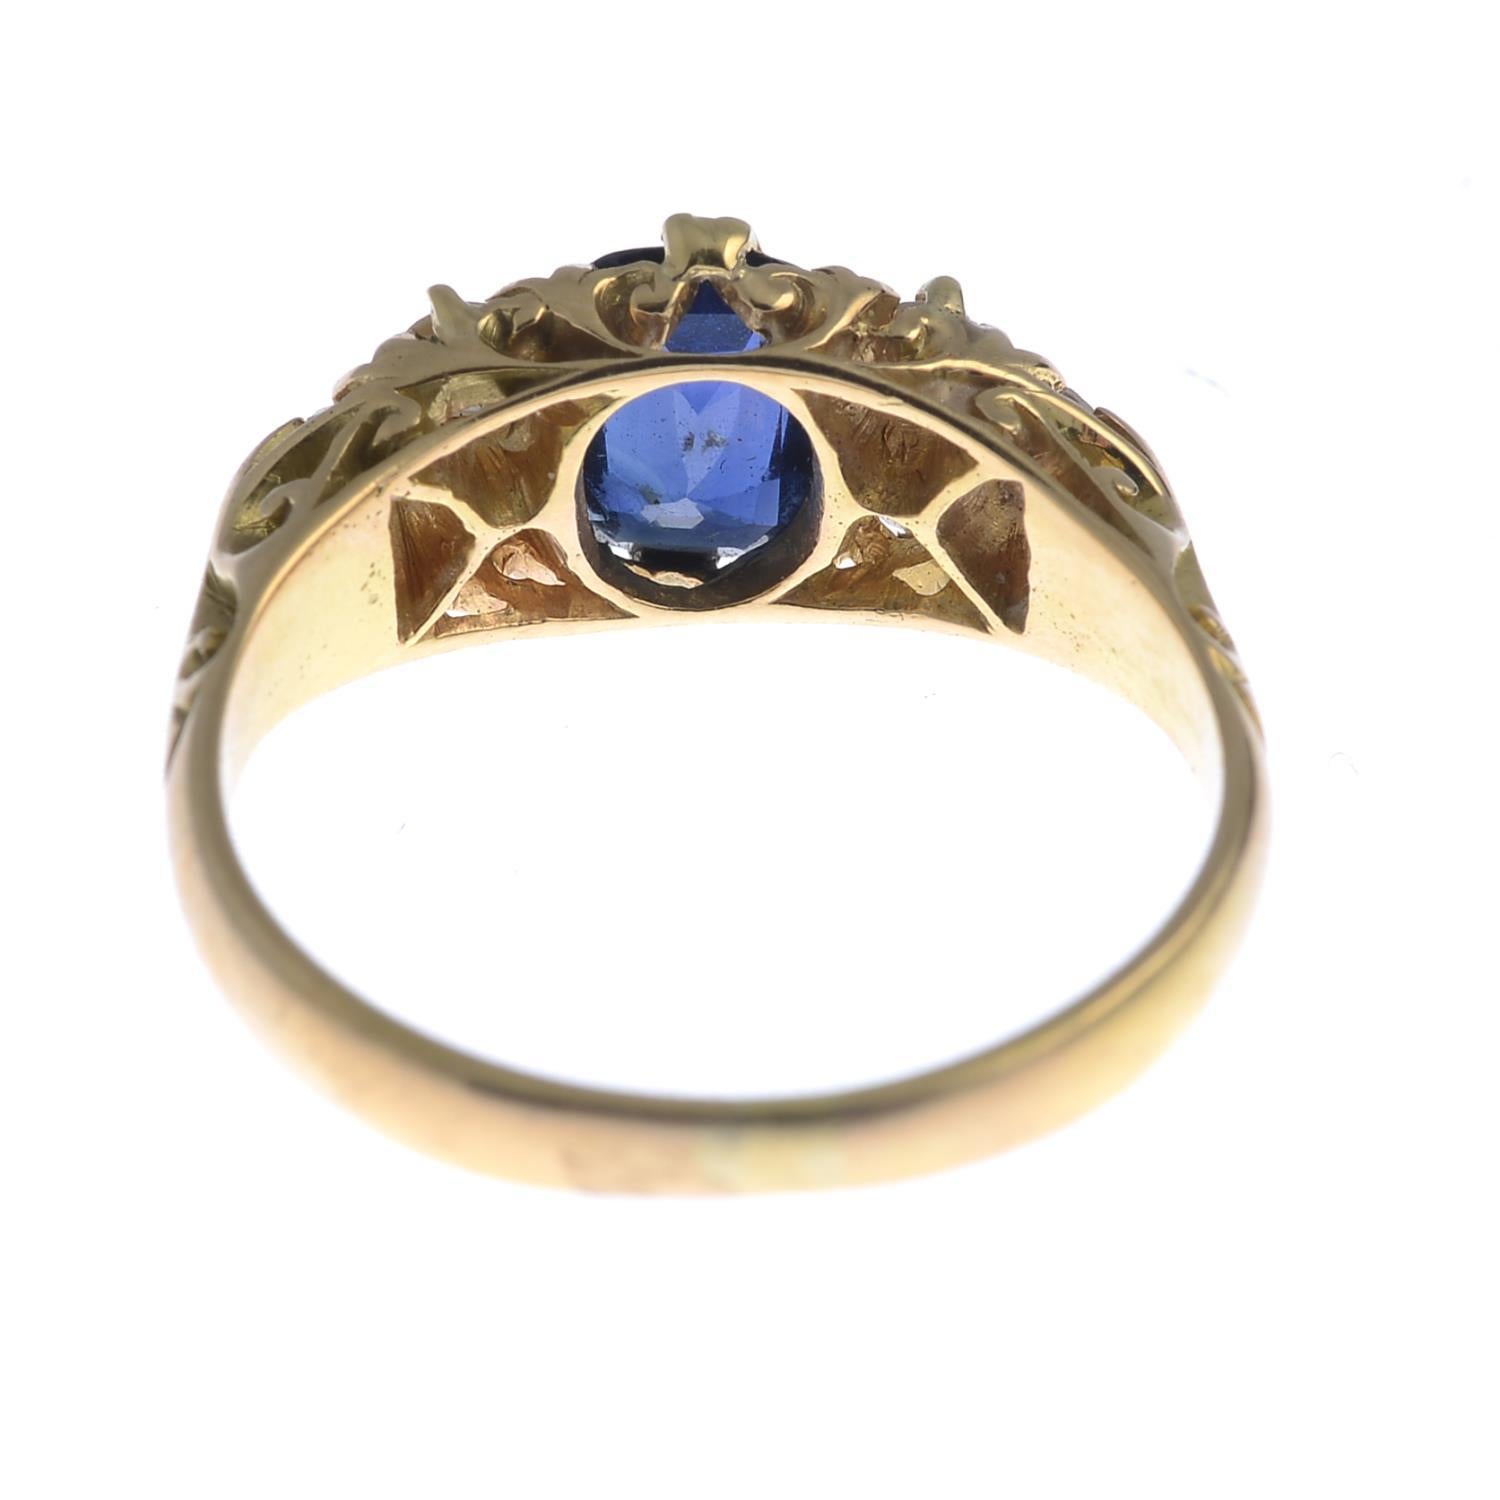 Edwardian Early 20th Century 18 Carat Gold Sapphire and Diamond Ring For Sale